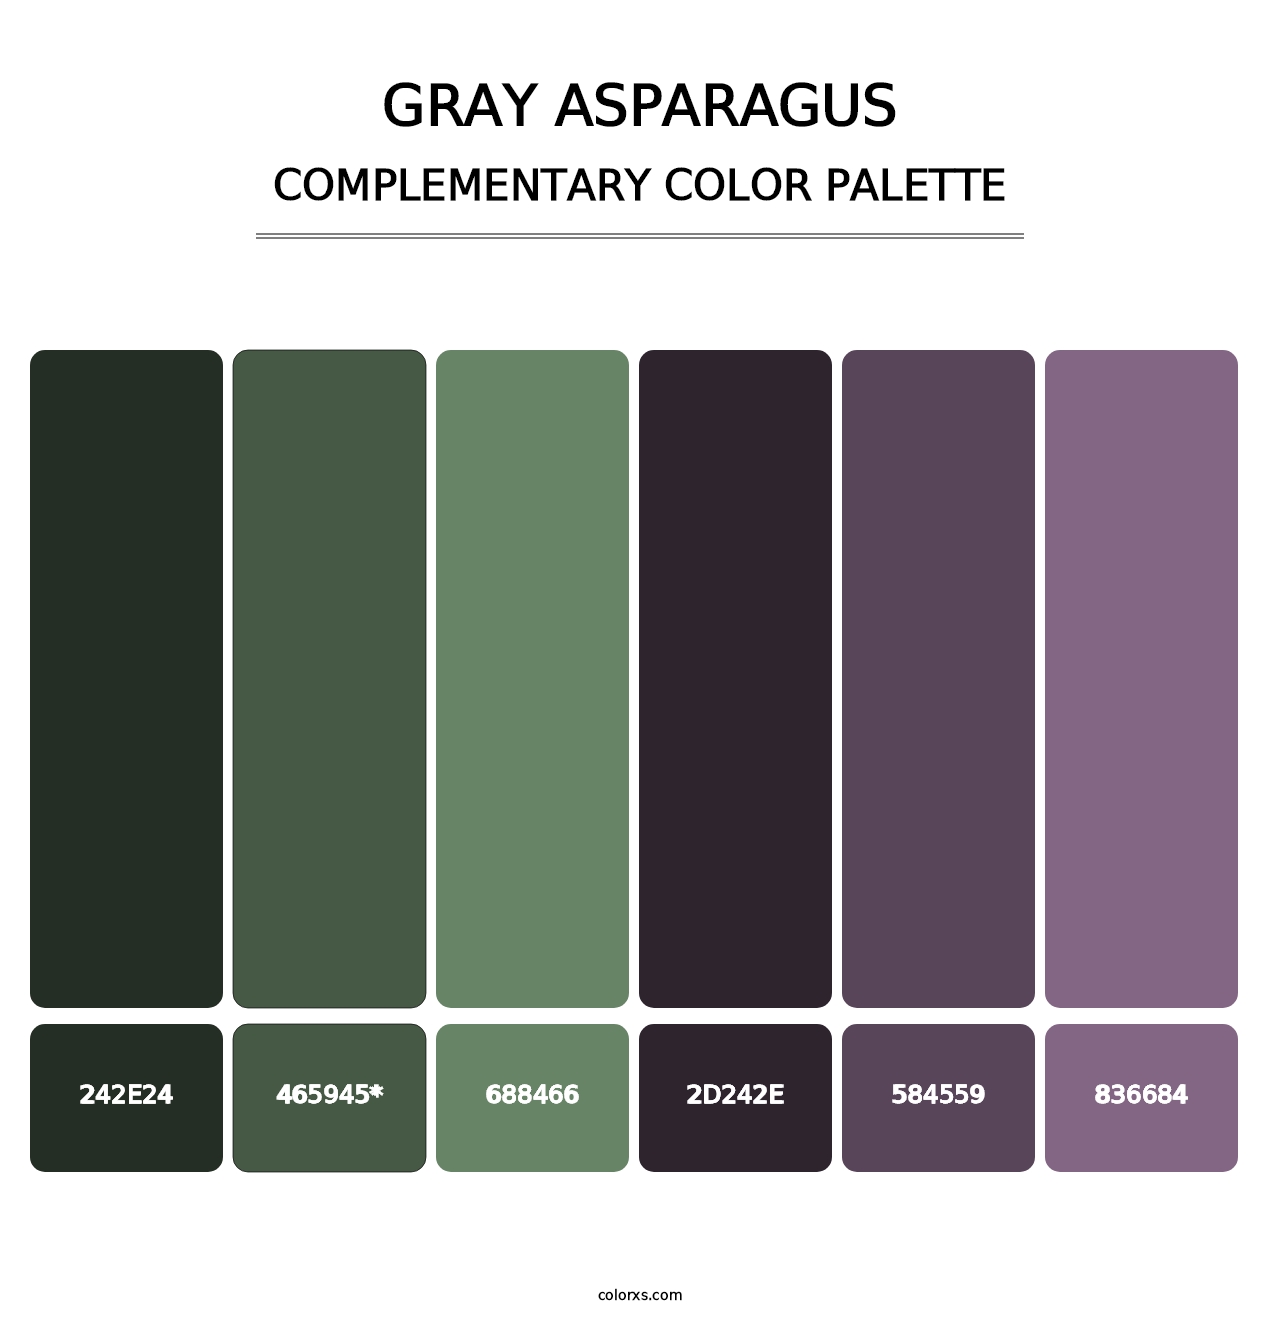 Gray Asparagus - Complementary Color Palette